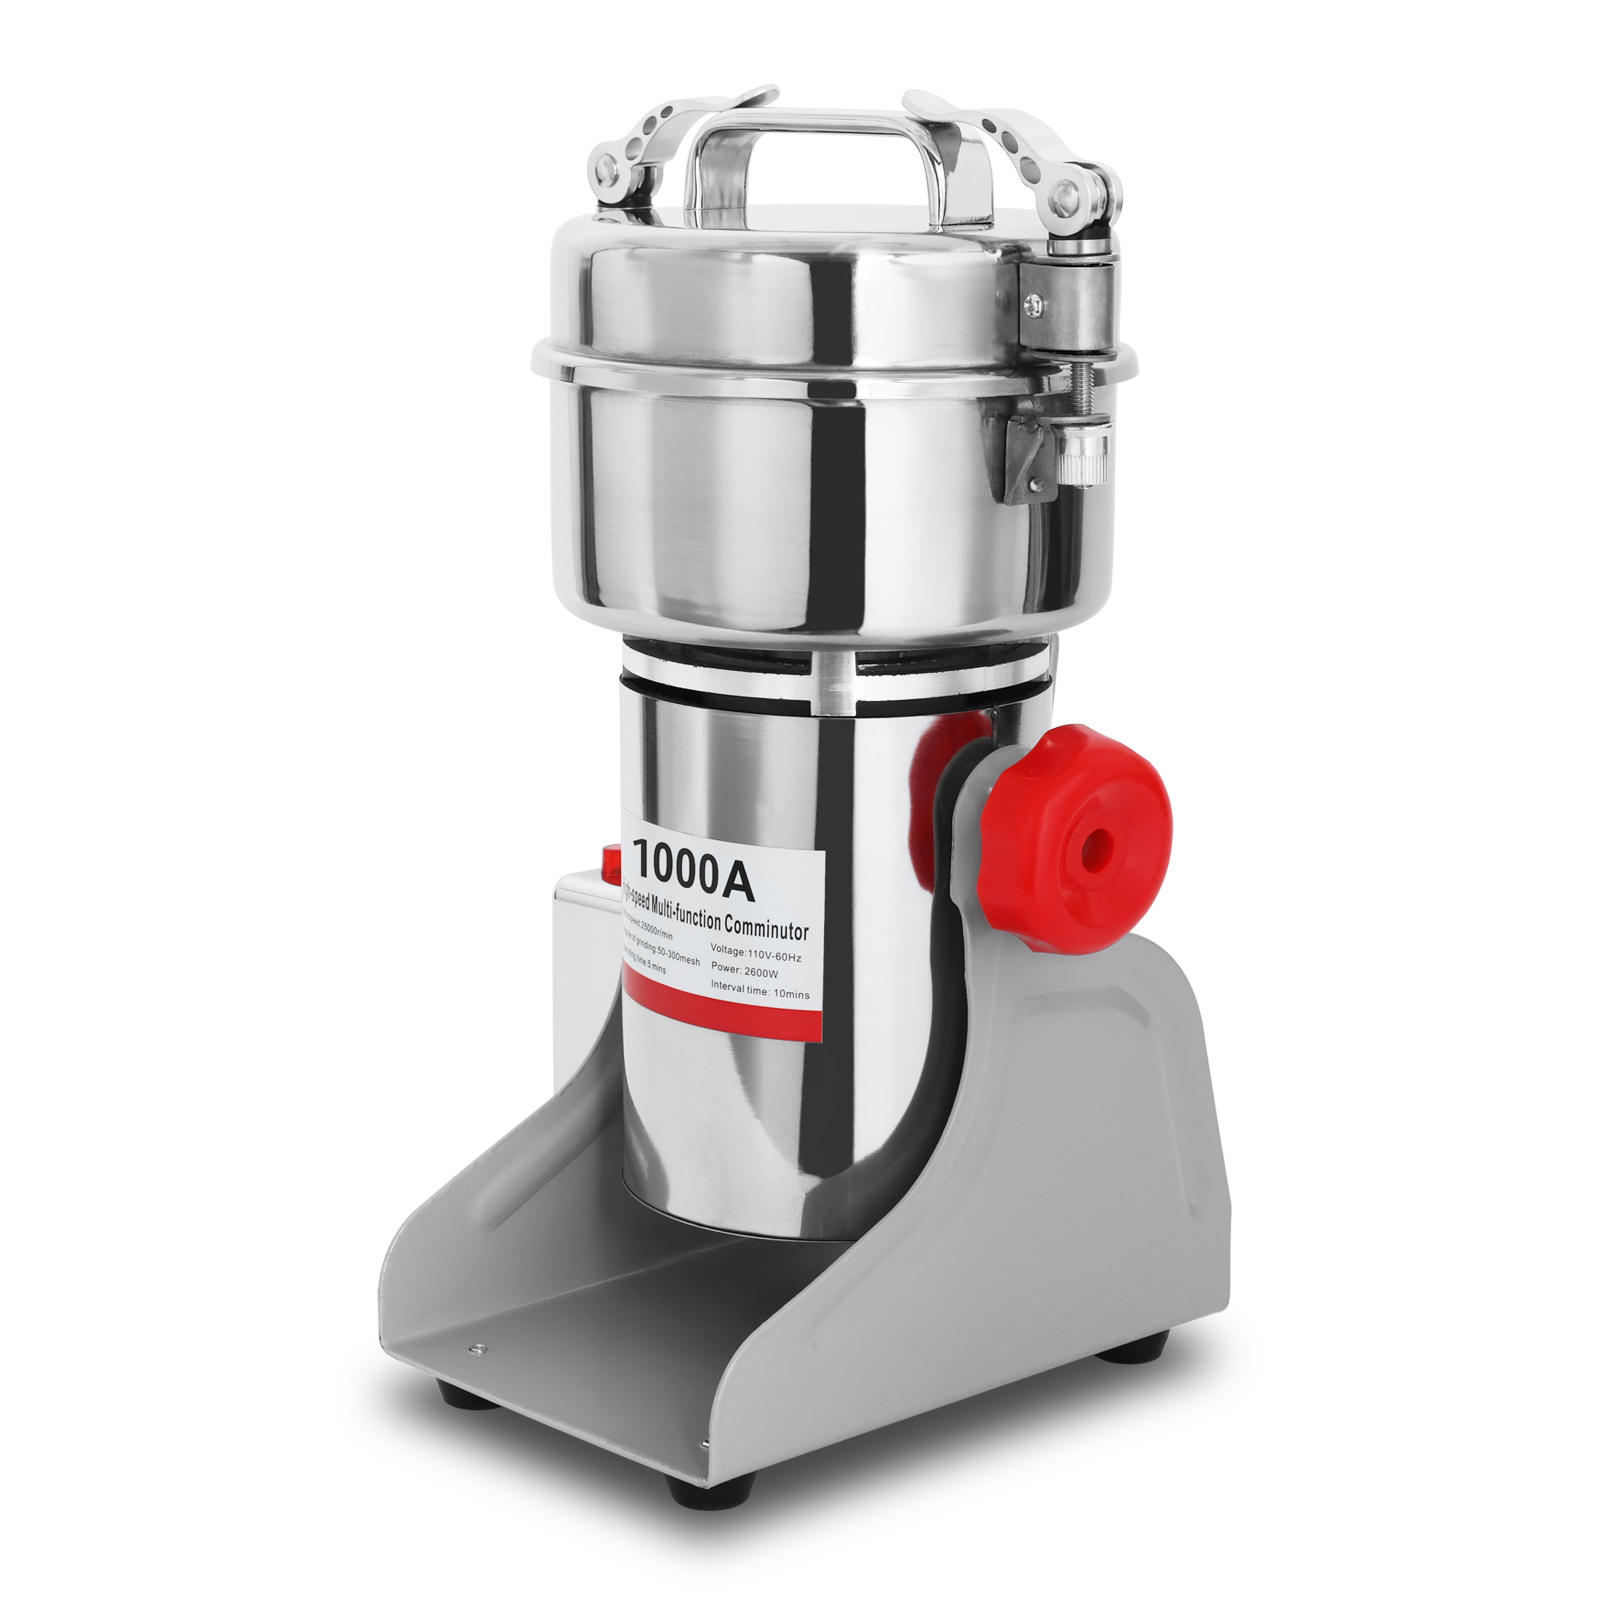 Spice Grinder Electric Grain Mill Grinder, 1000g Dry Mill Grain Machine,  Commercial 2600W Coffee Spice Herb Corn Grinder